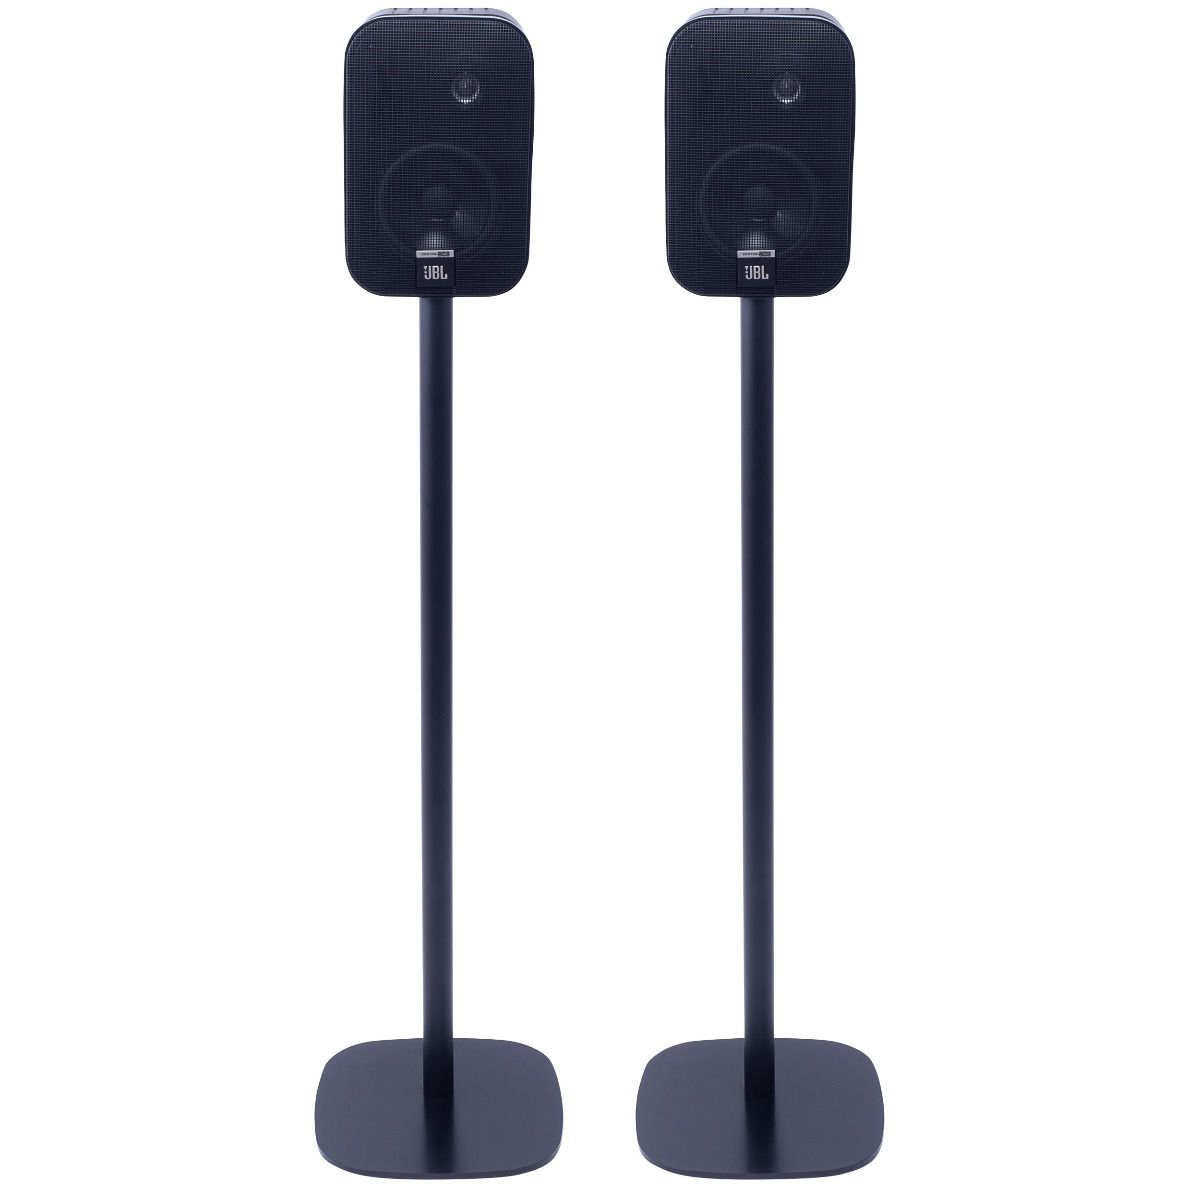 Vebos floor stand JBL Control One black | The floor stand for JBL Control One